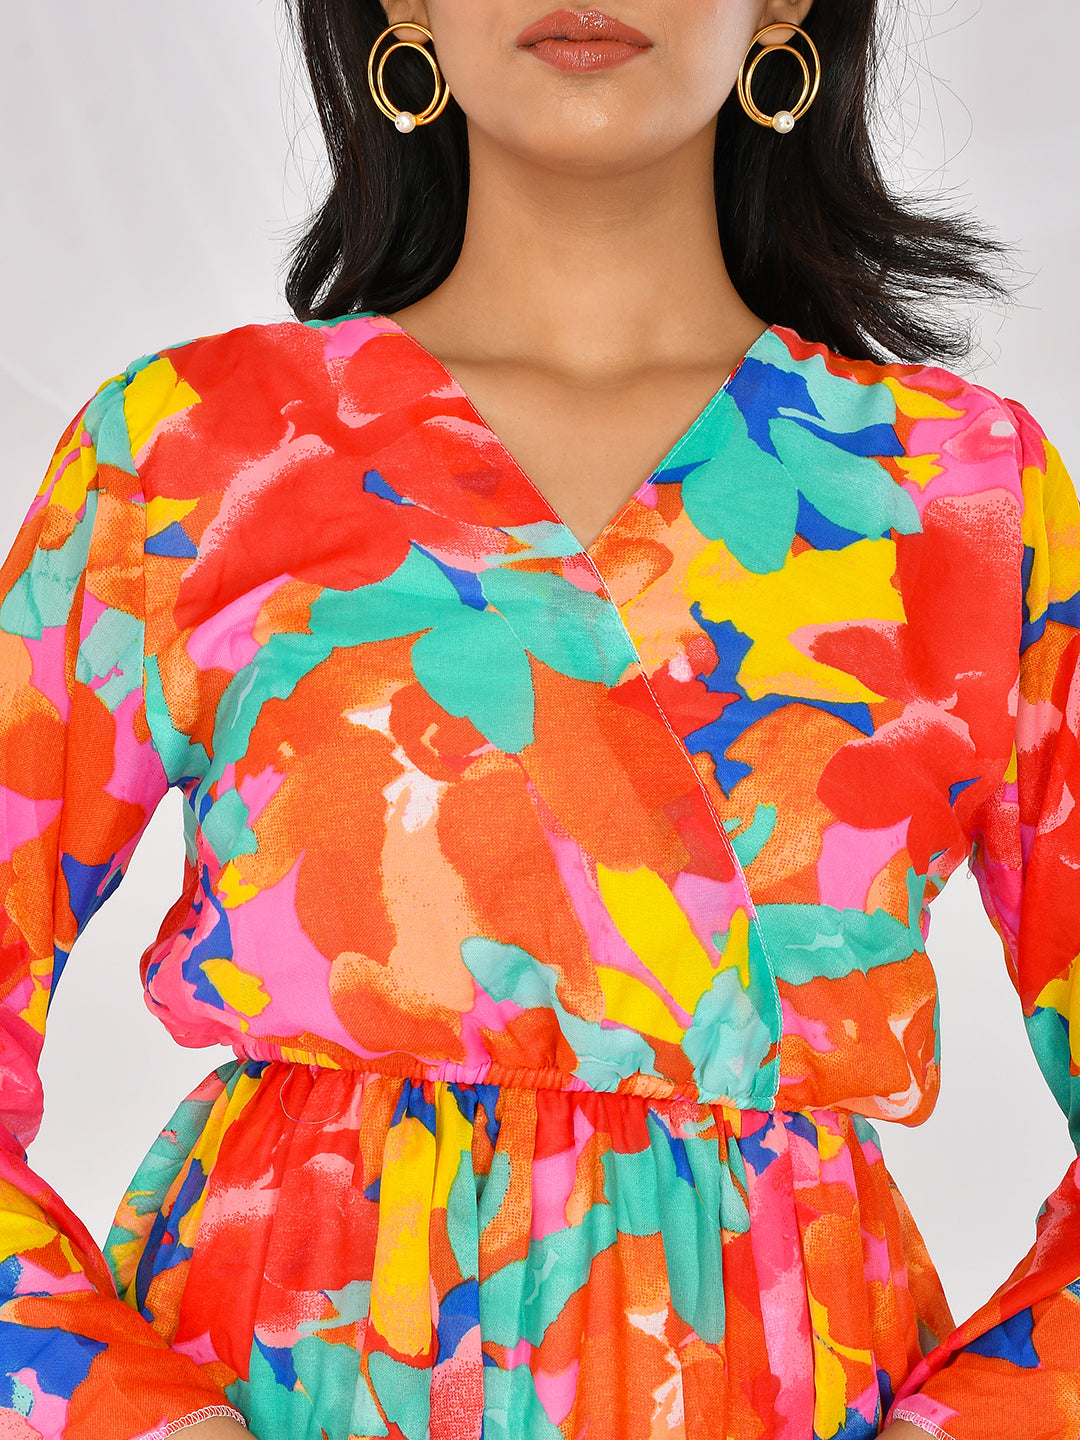 Zando - New season 🌺 new dresses 👗! The ease and polish that comes with  wearing a dress is unmatched! Refresh your wardrobe with bright colours and  gorgeous prints that are perfect